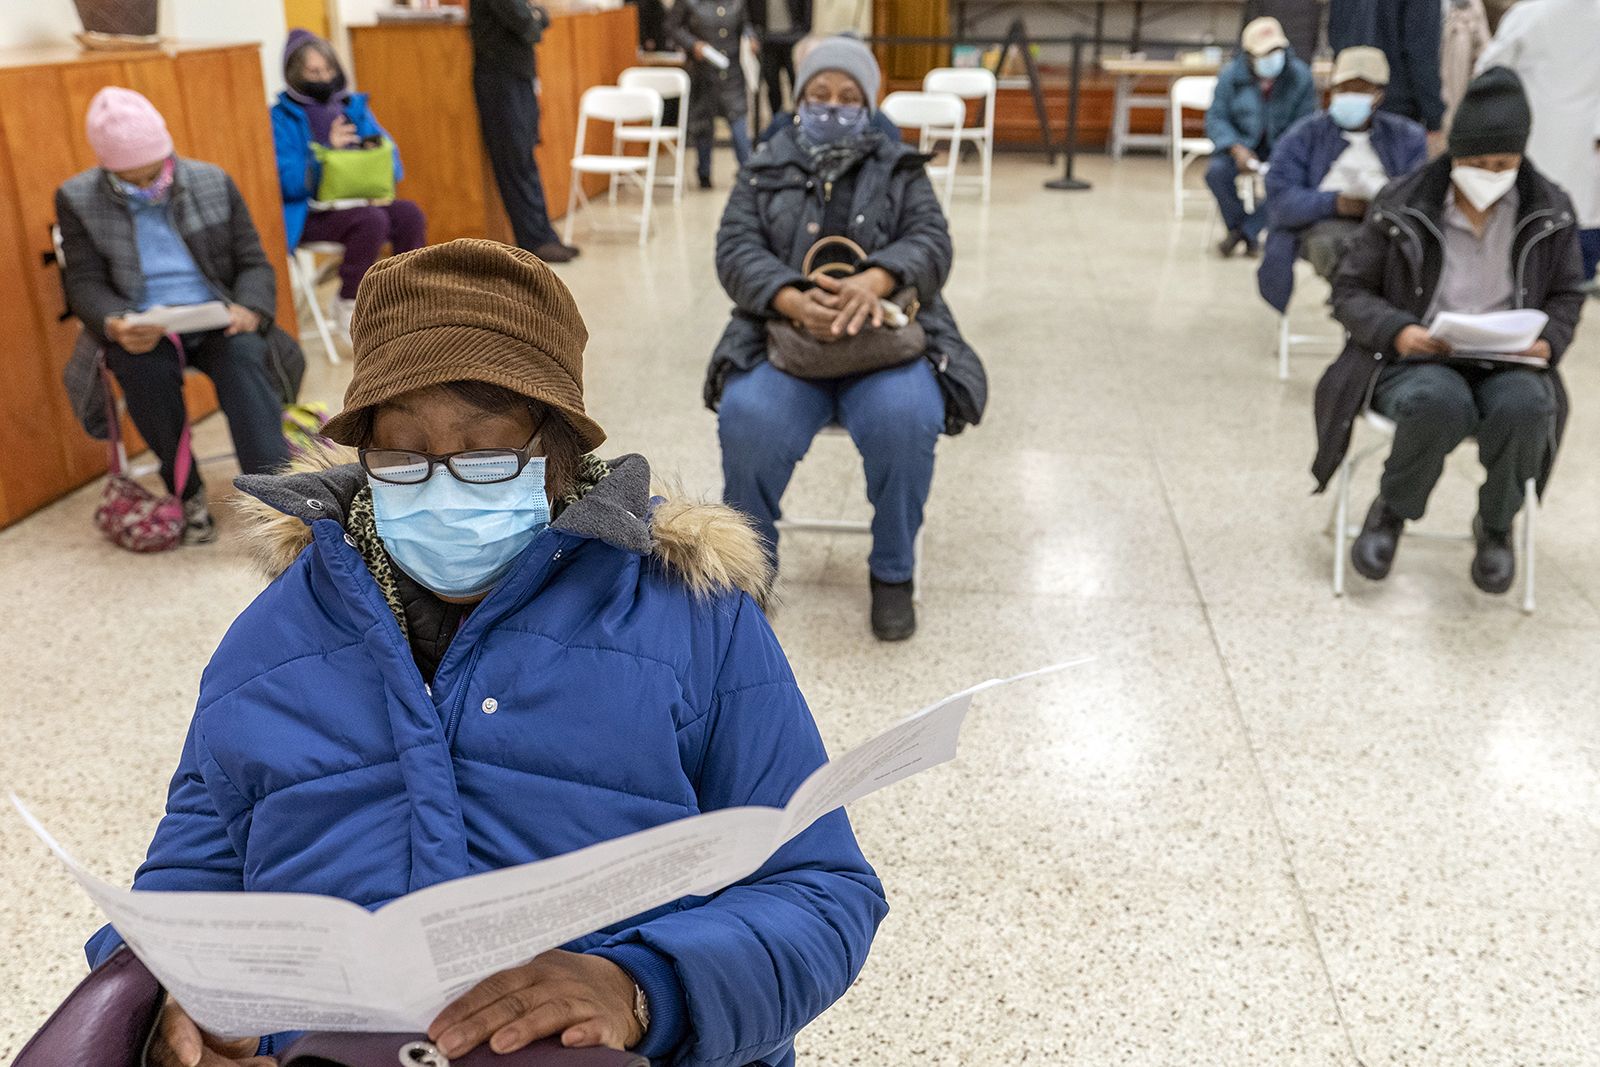 Elaine Chambers reads a coronavirus vaccination pamphlet while resting after receiving the first dose of the vaccine at a pop-up COVID-19 vaccination site at St. Luke's Episcopal Church, Tuesday, Jan. 26, 2021, in the Bronx borough of New York. (AP Photo/Mary Altaffer)